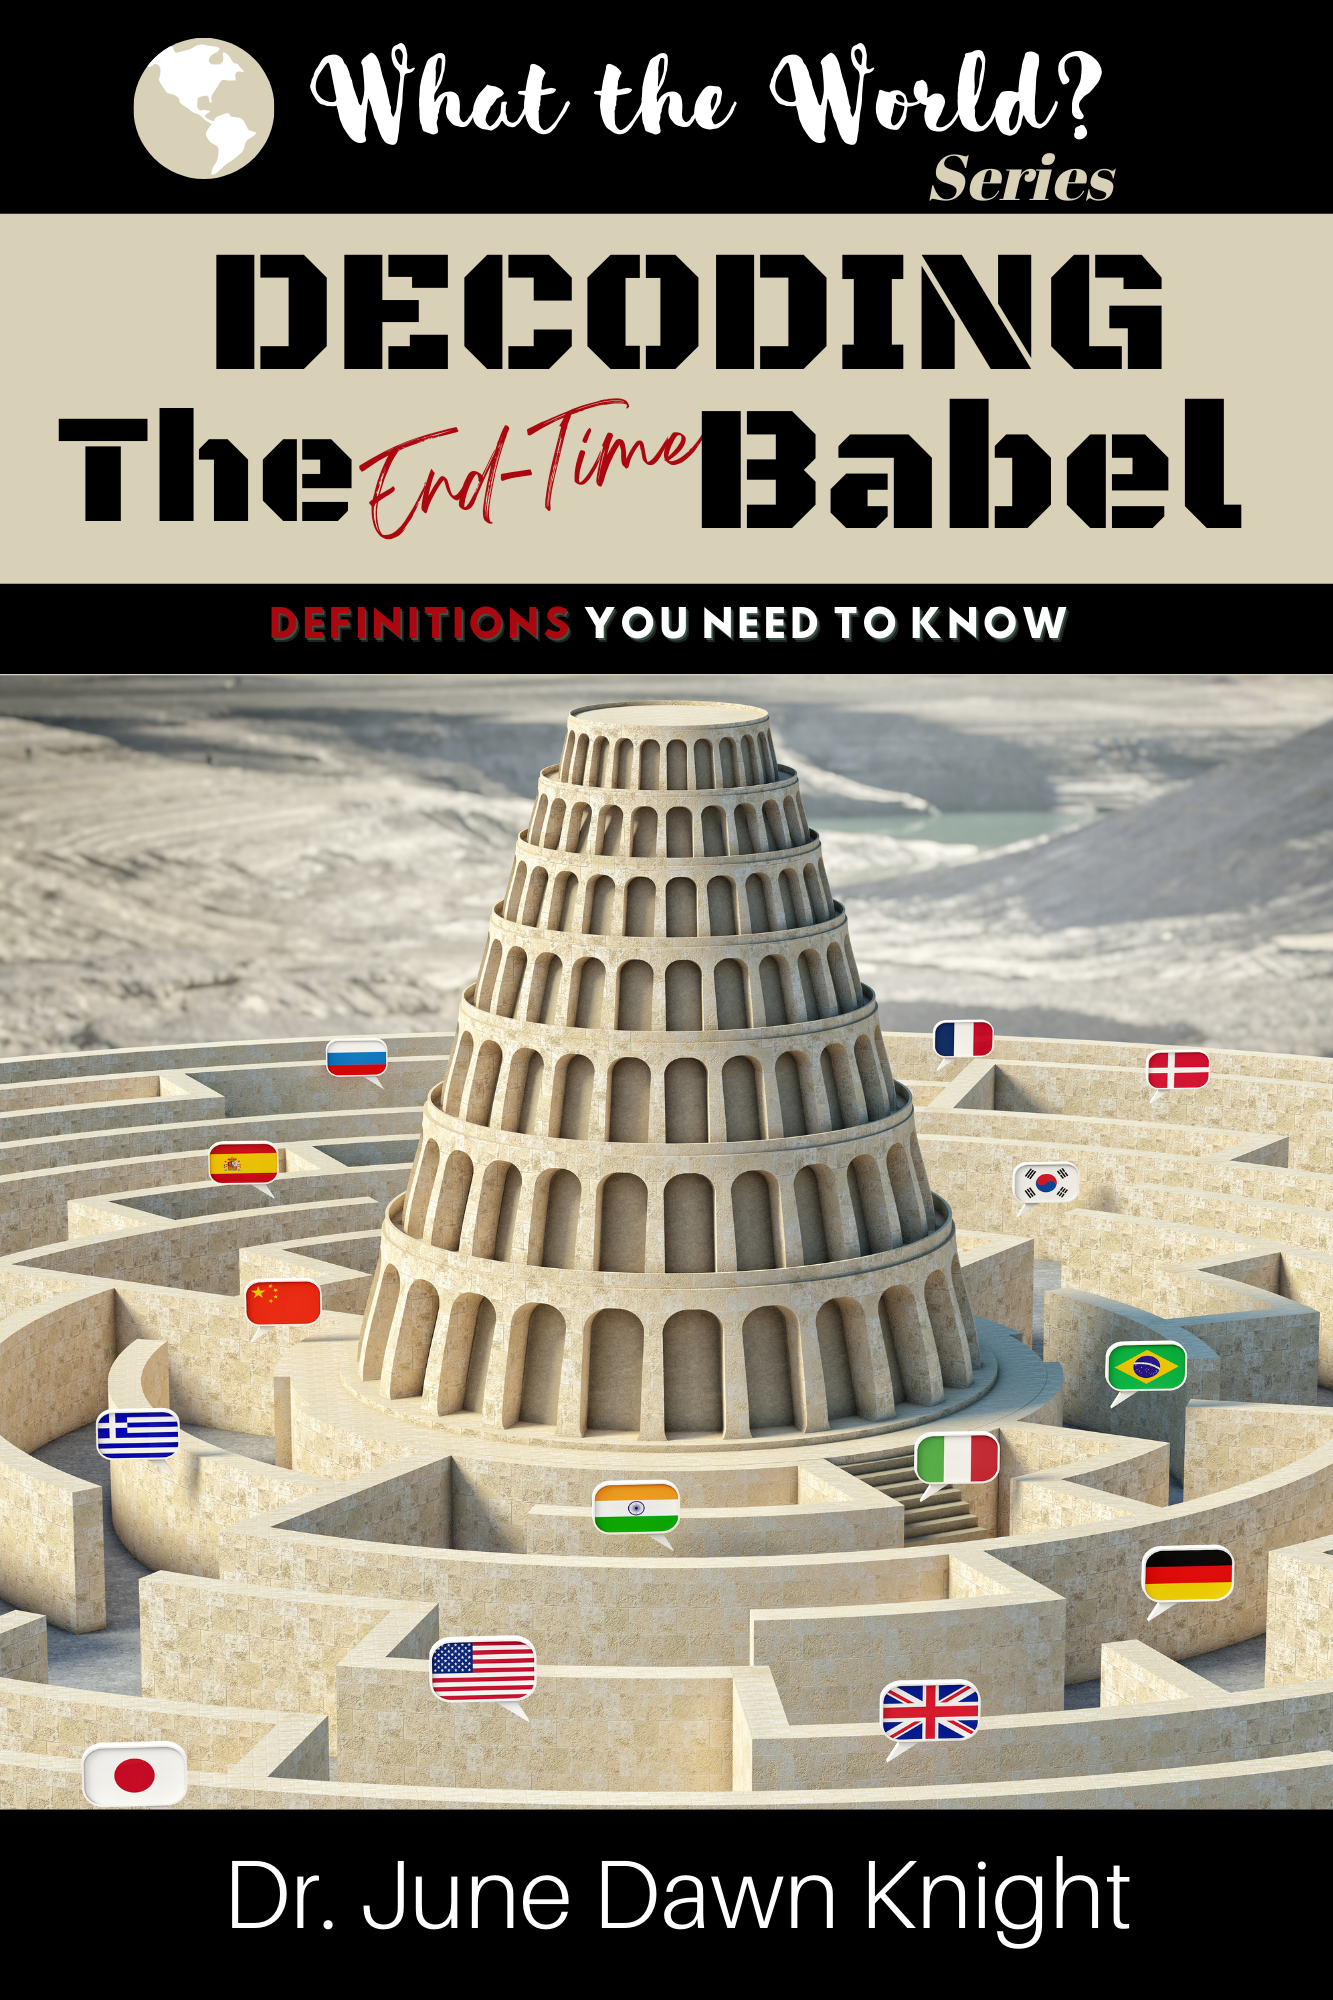 WTW - Decoding the End-Time Babel - E-Book